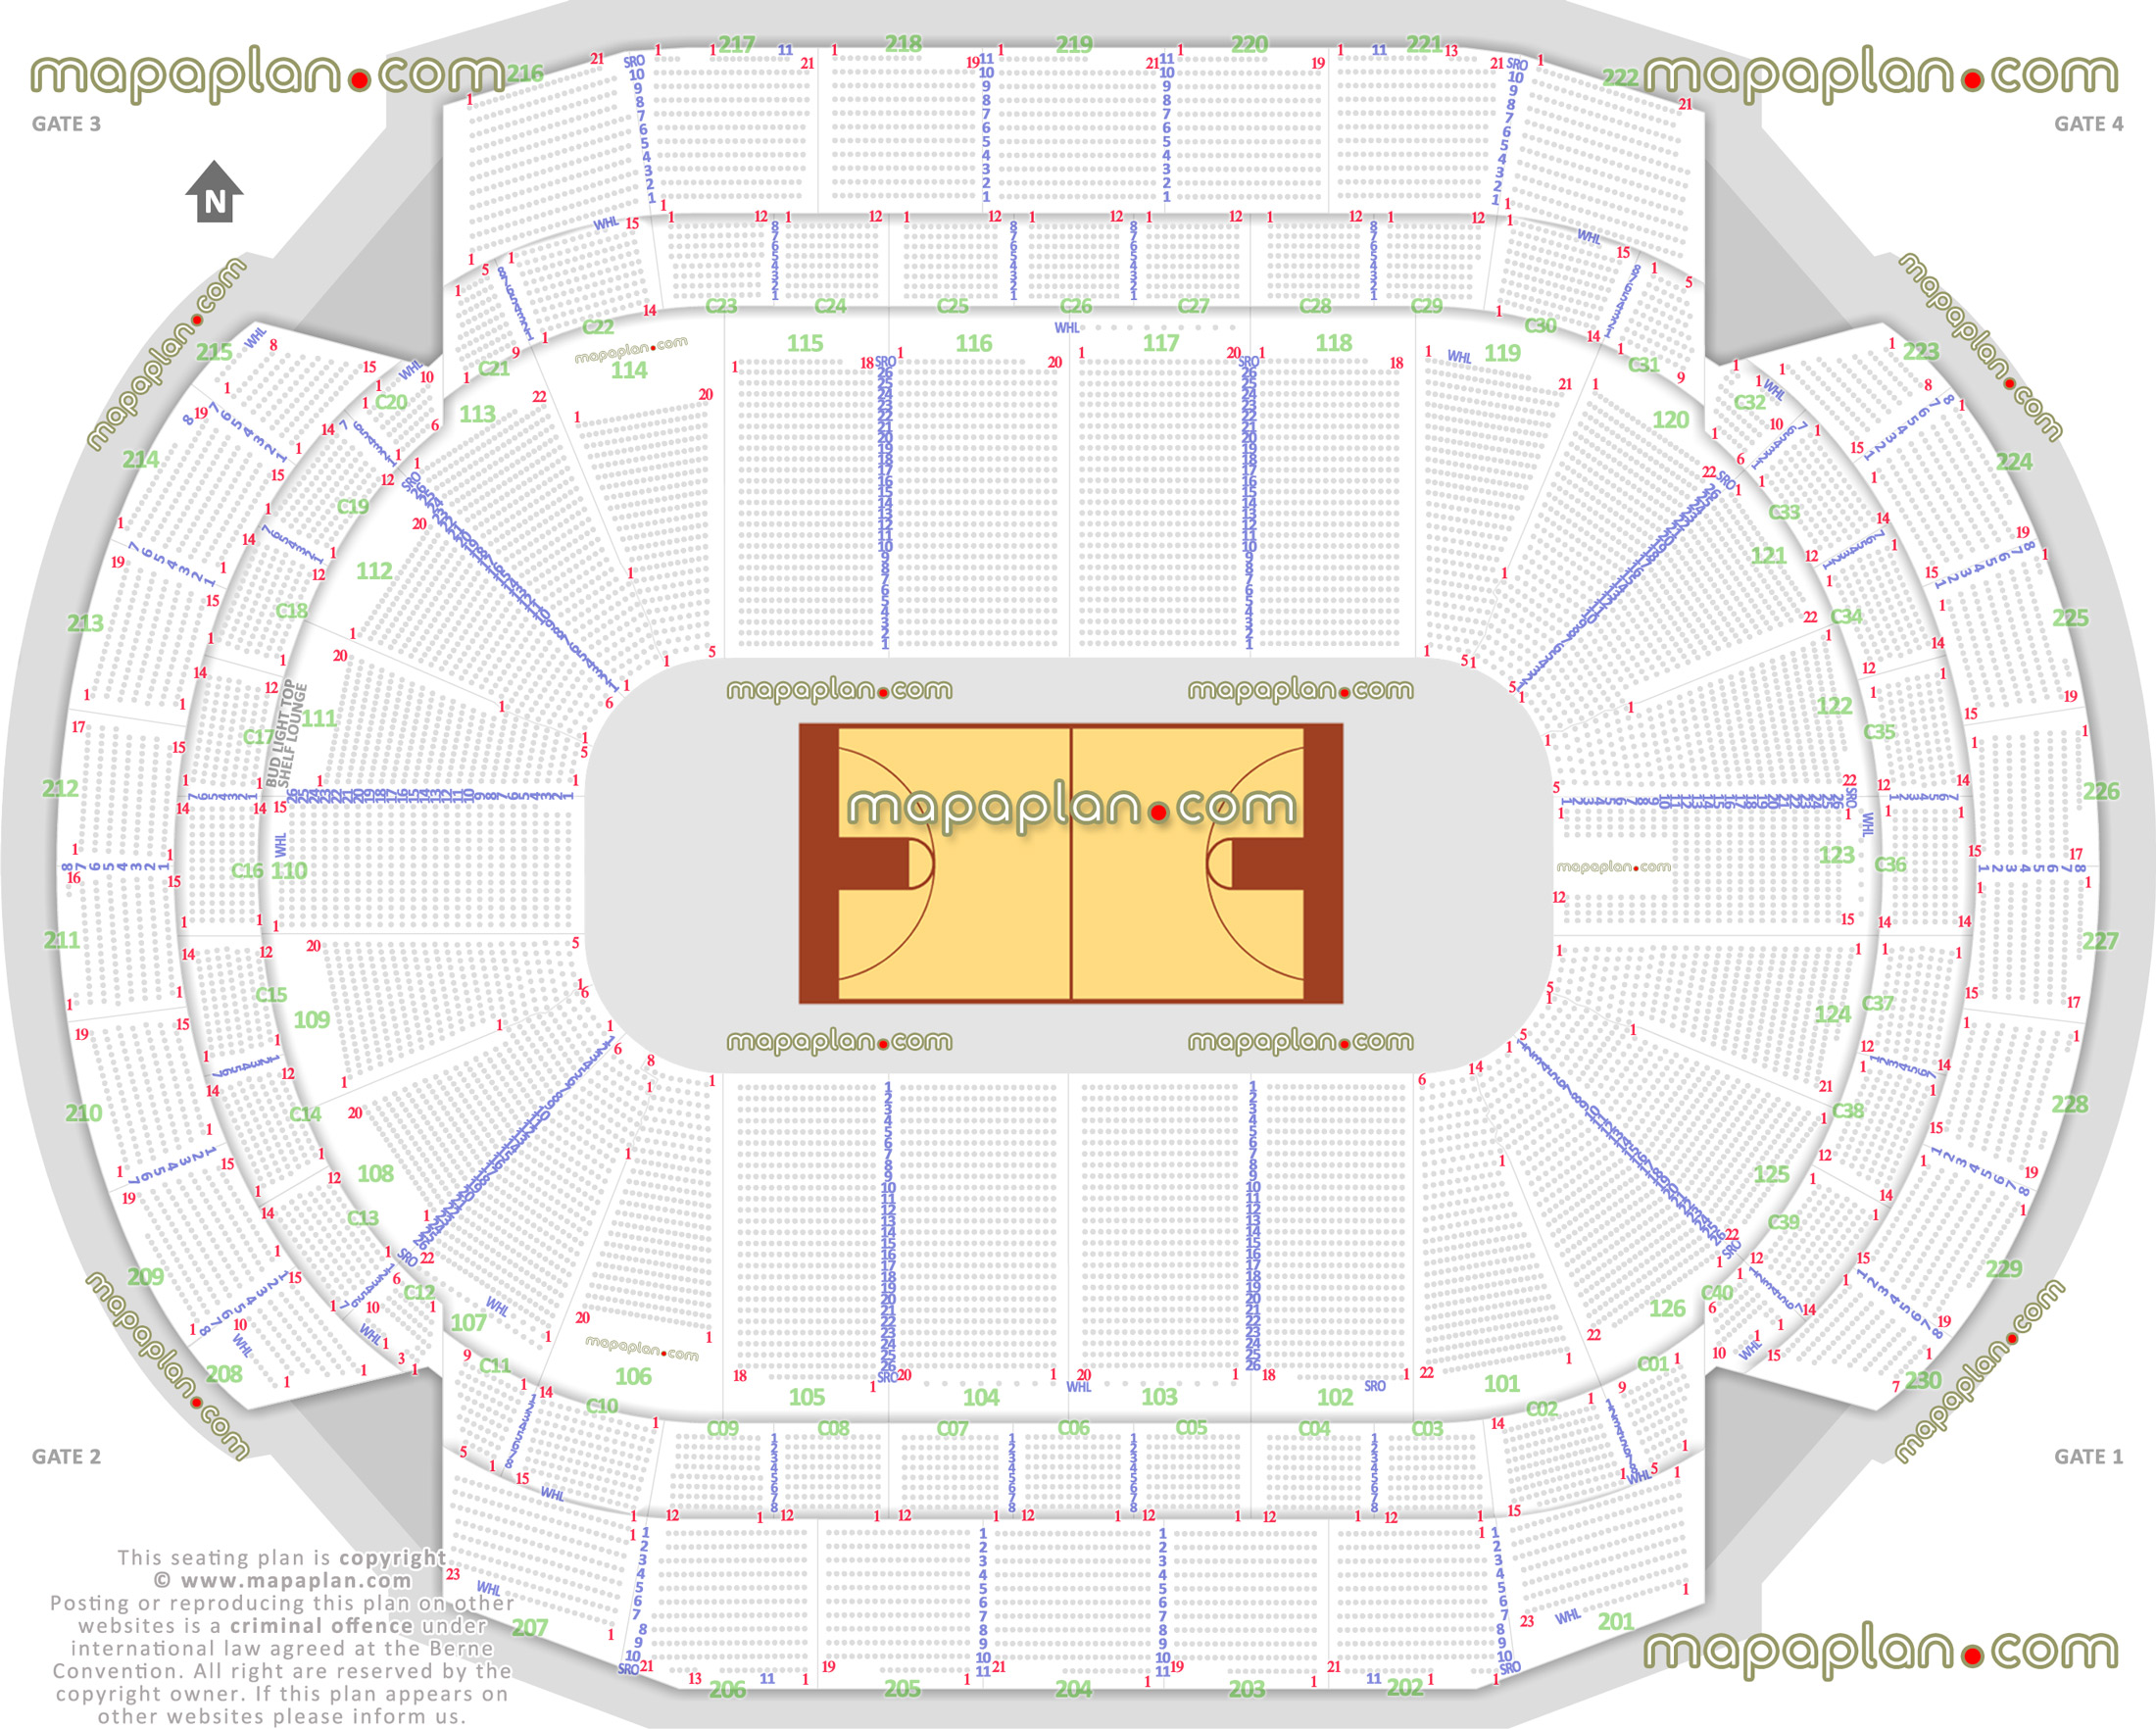 basketball games arena seating capacity arrangement diagram xcel energy centre arena minnesota interactive virtual 3d detailed layout glass rinkside lower upper level stadium bowl sections full exact row numbers plan seats row lower upper level sections Saint Paul Xcel Energy Center seating chart